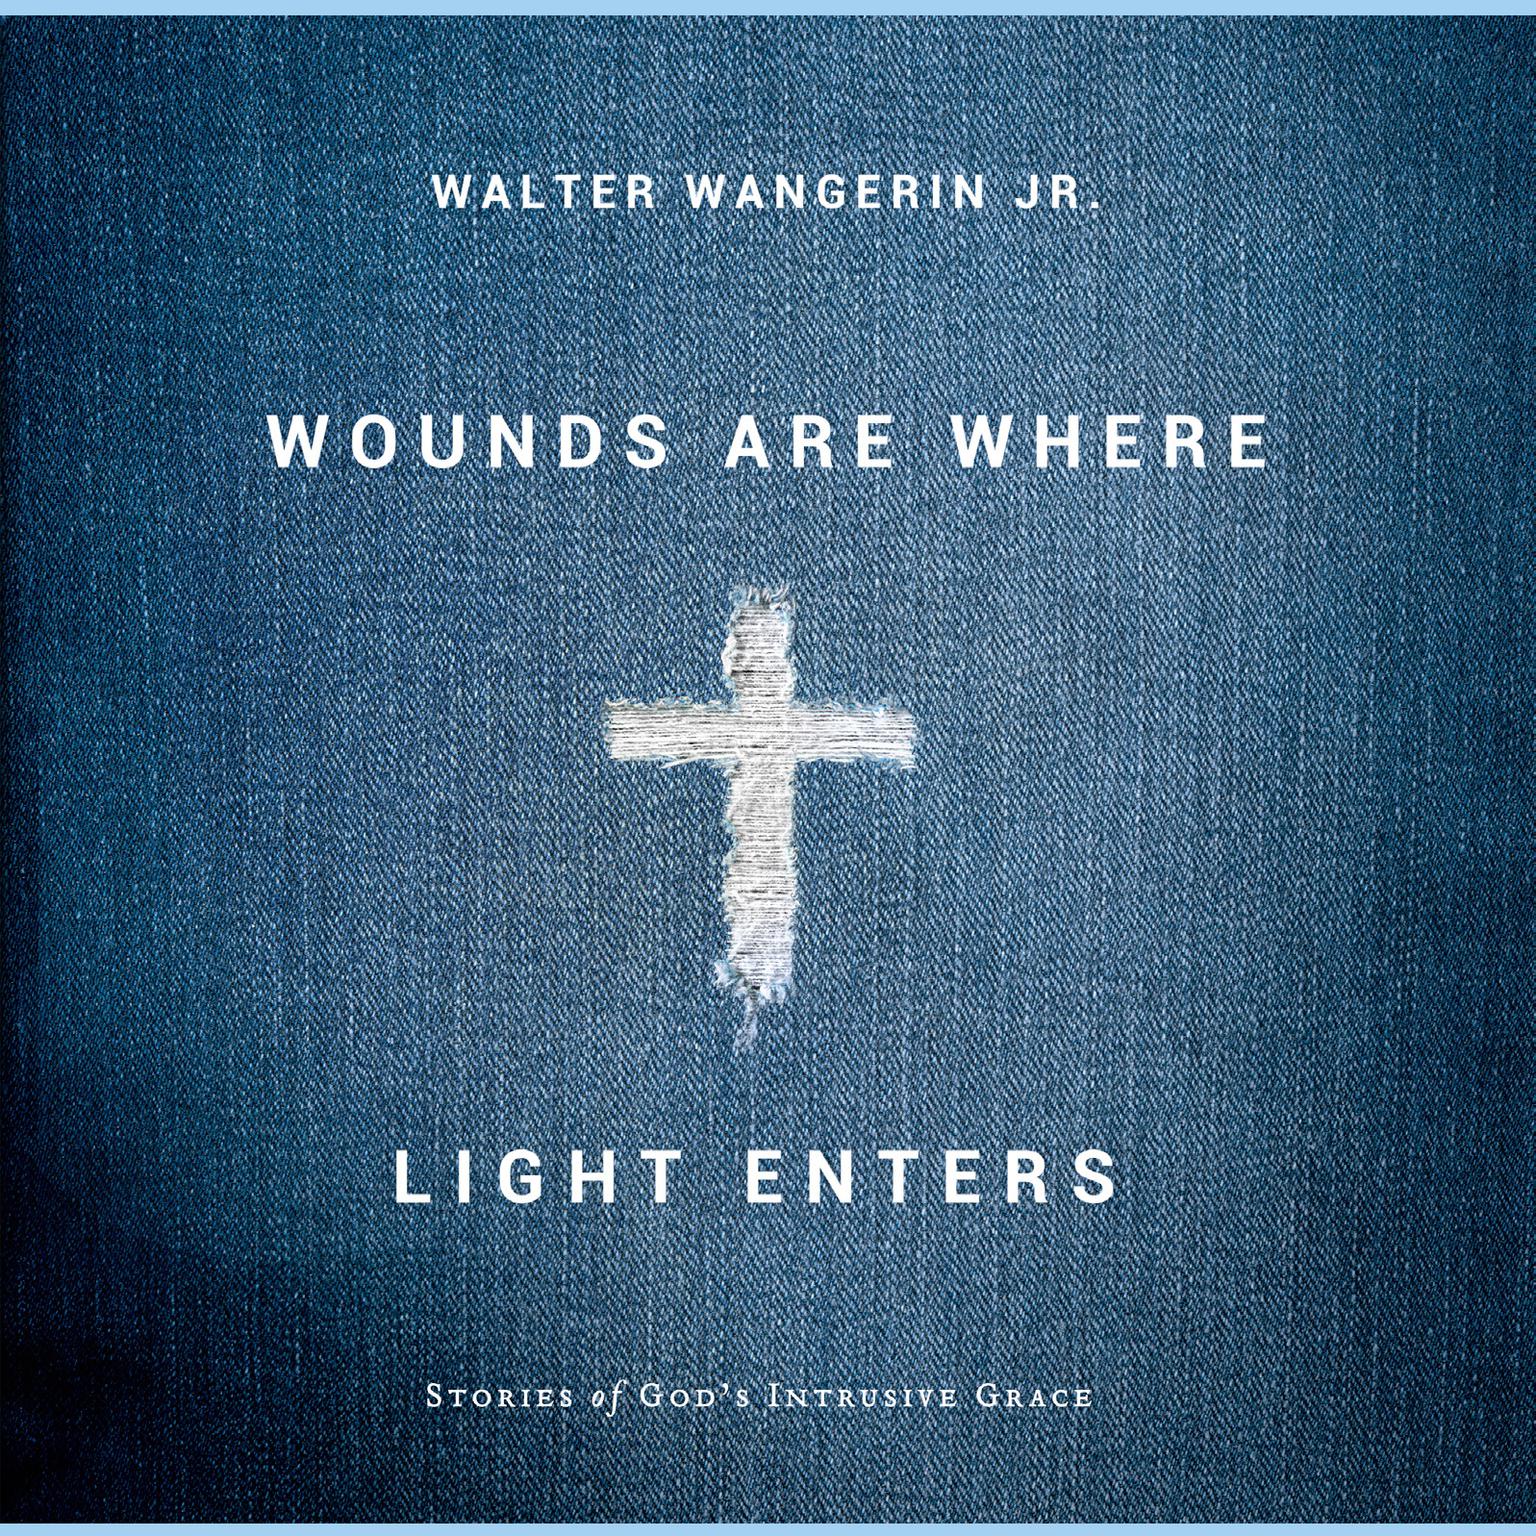 Wounds Are Where Light Enters: Stories of Gods Intrusive Grace Audiobook, by Walter Wangerin